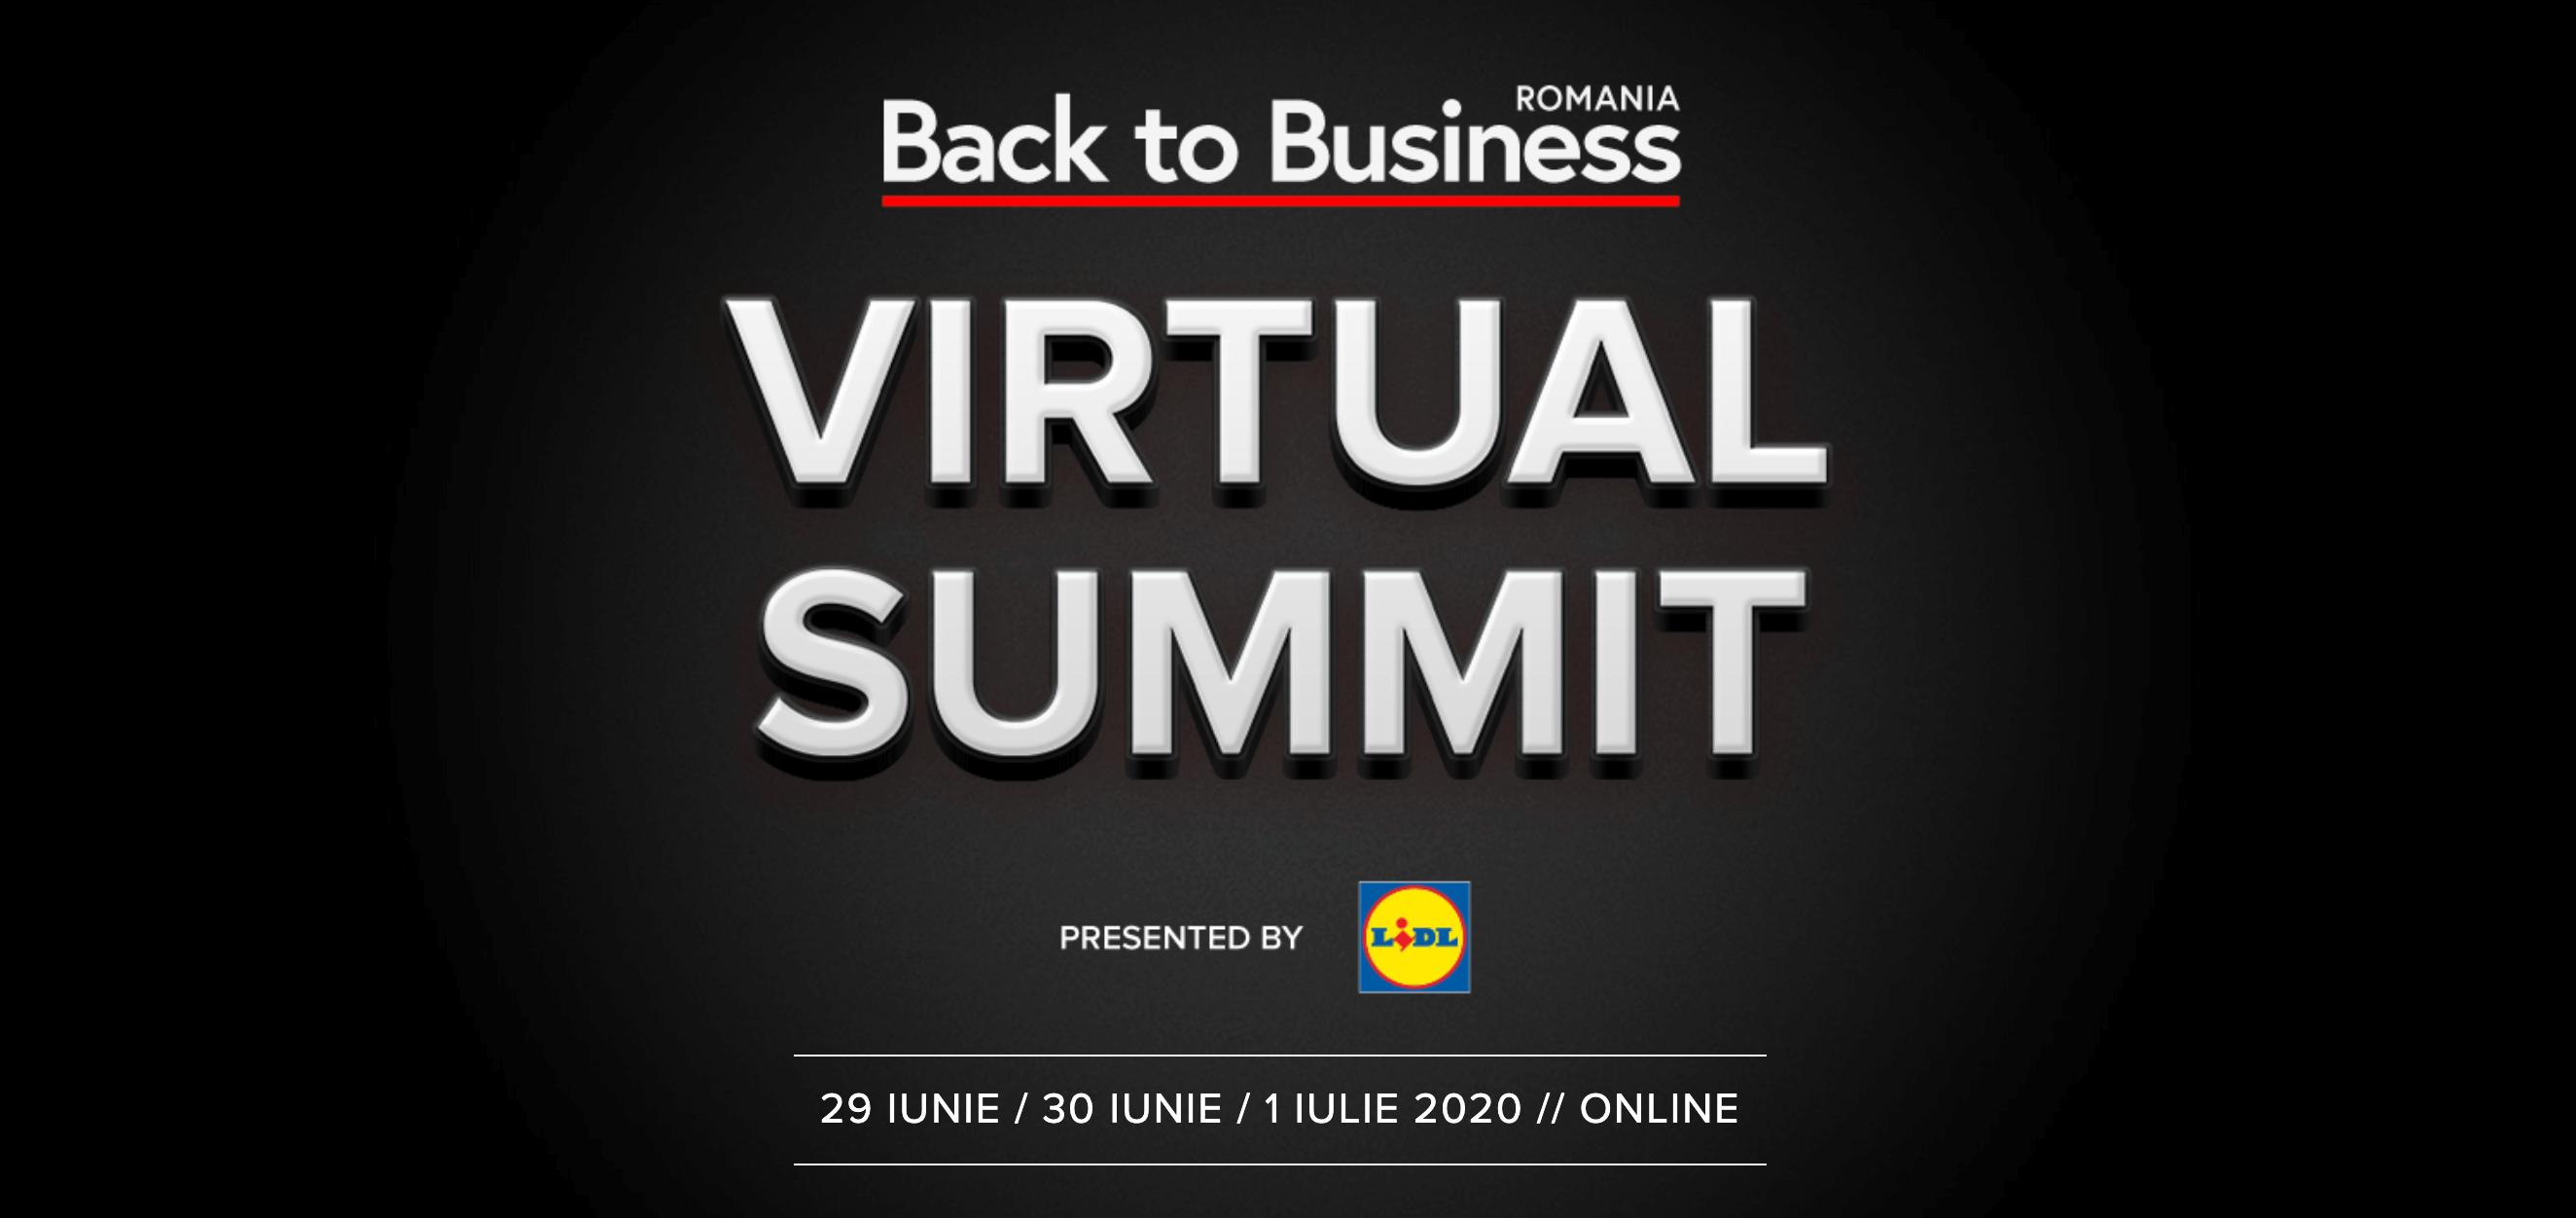 Back to Business Virtual Summit: 3 days packed with valuable information for marketers